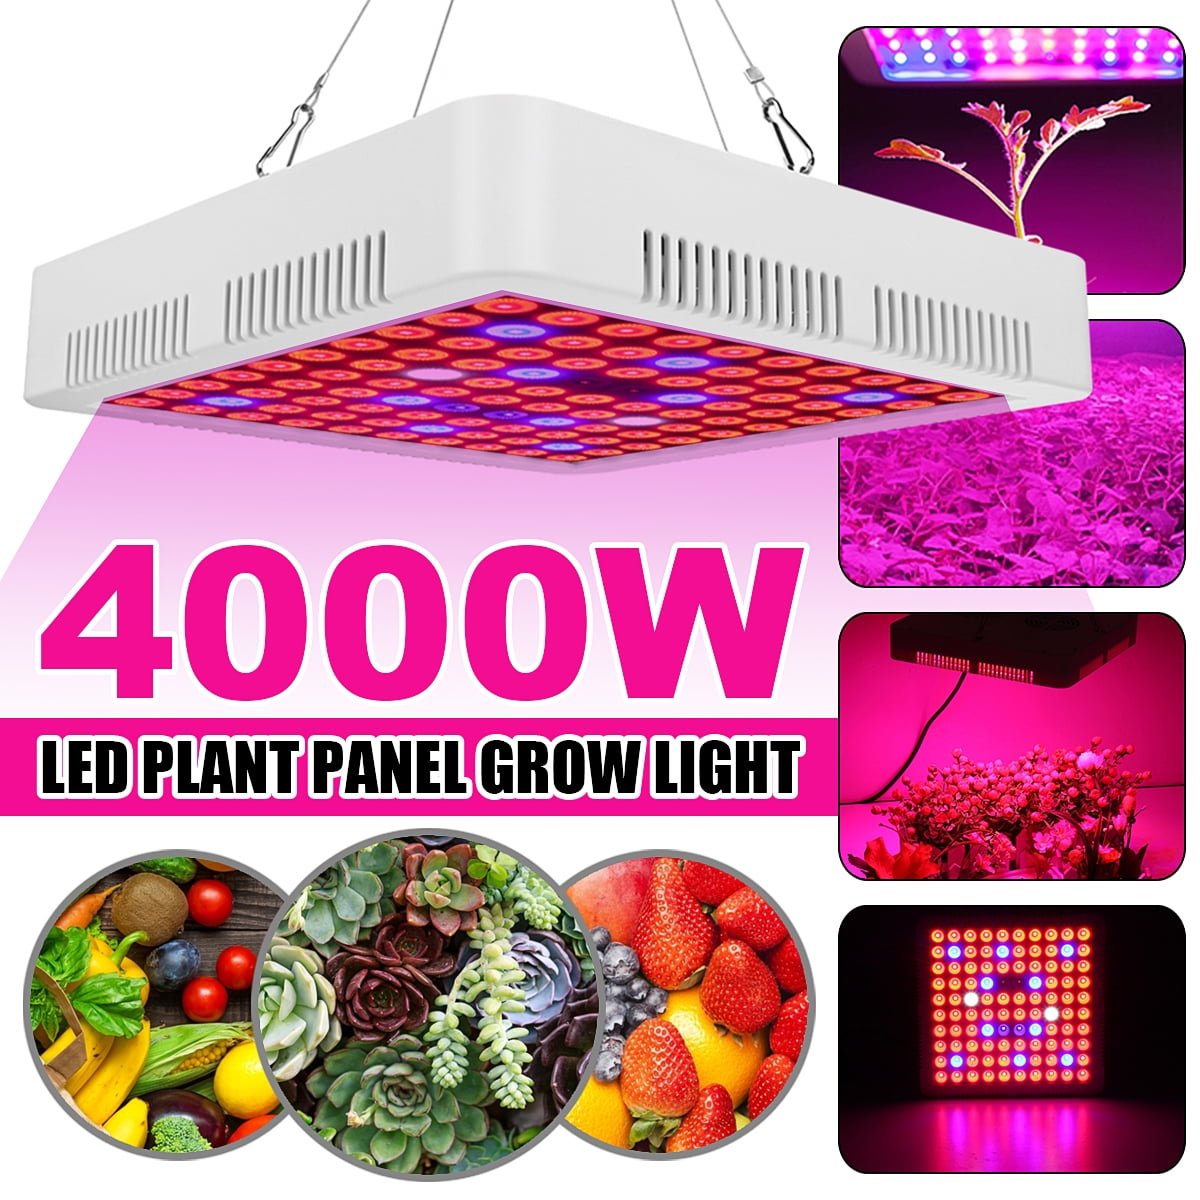 5000W LED Grow Light Bulb Growing Lamp Full Spectrum for Indoor Plant Hydroponic 